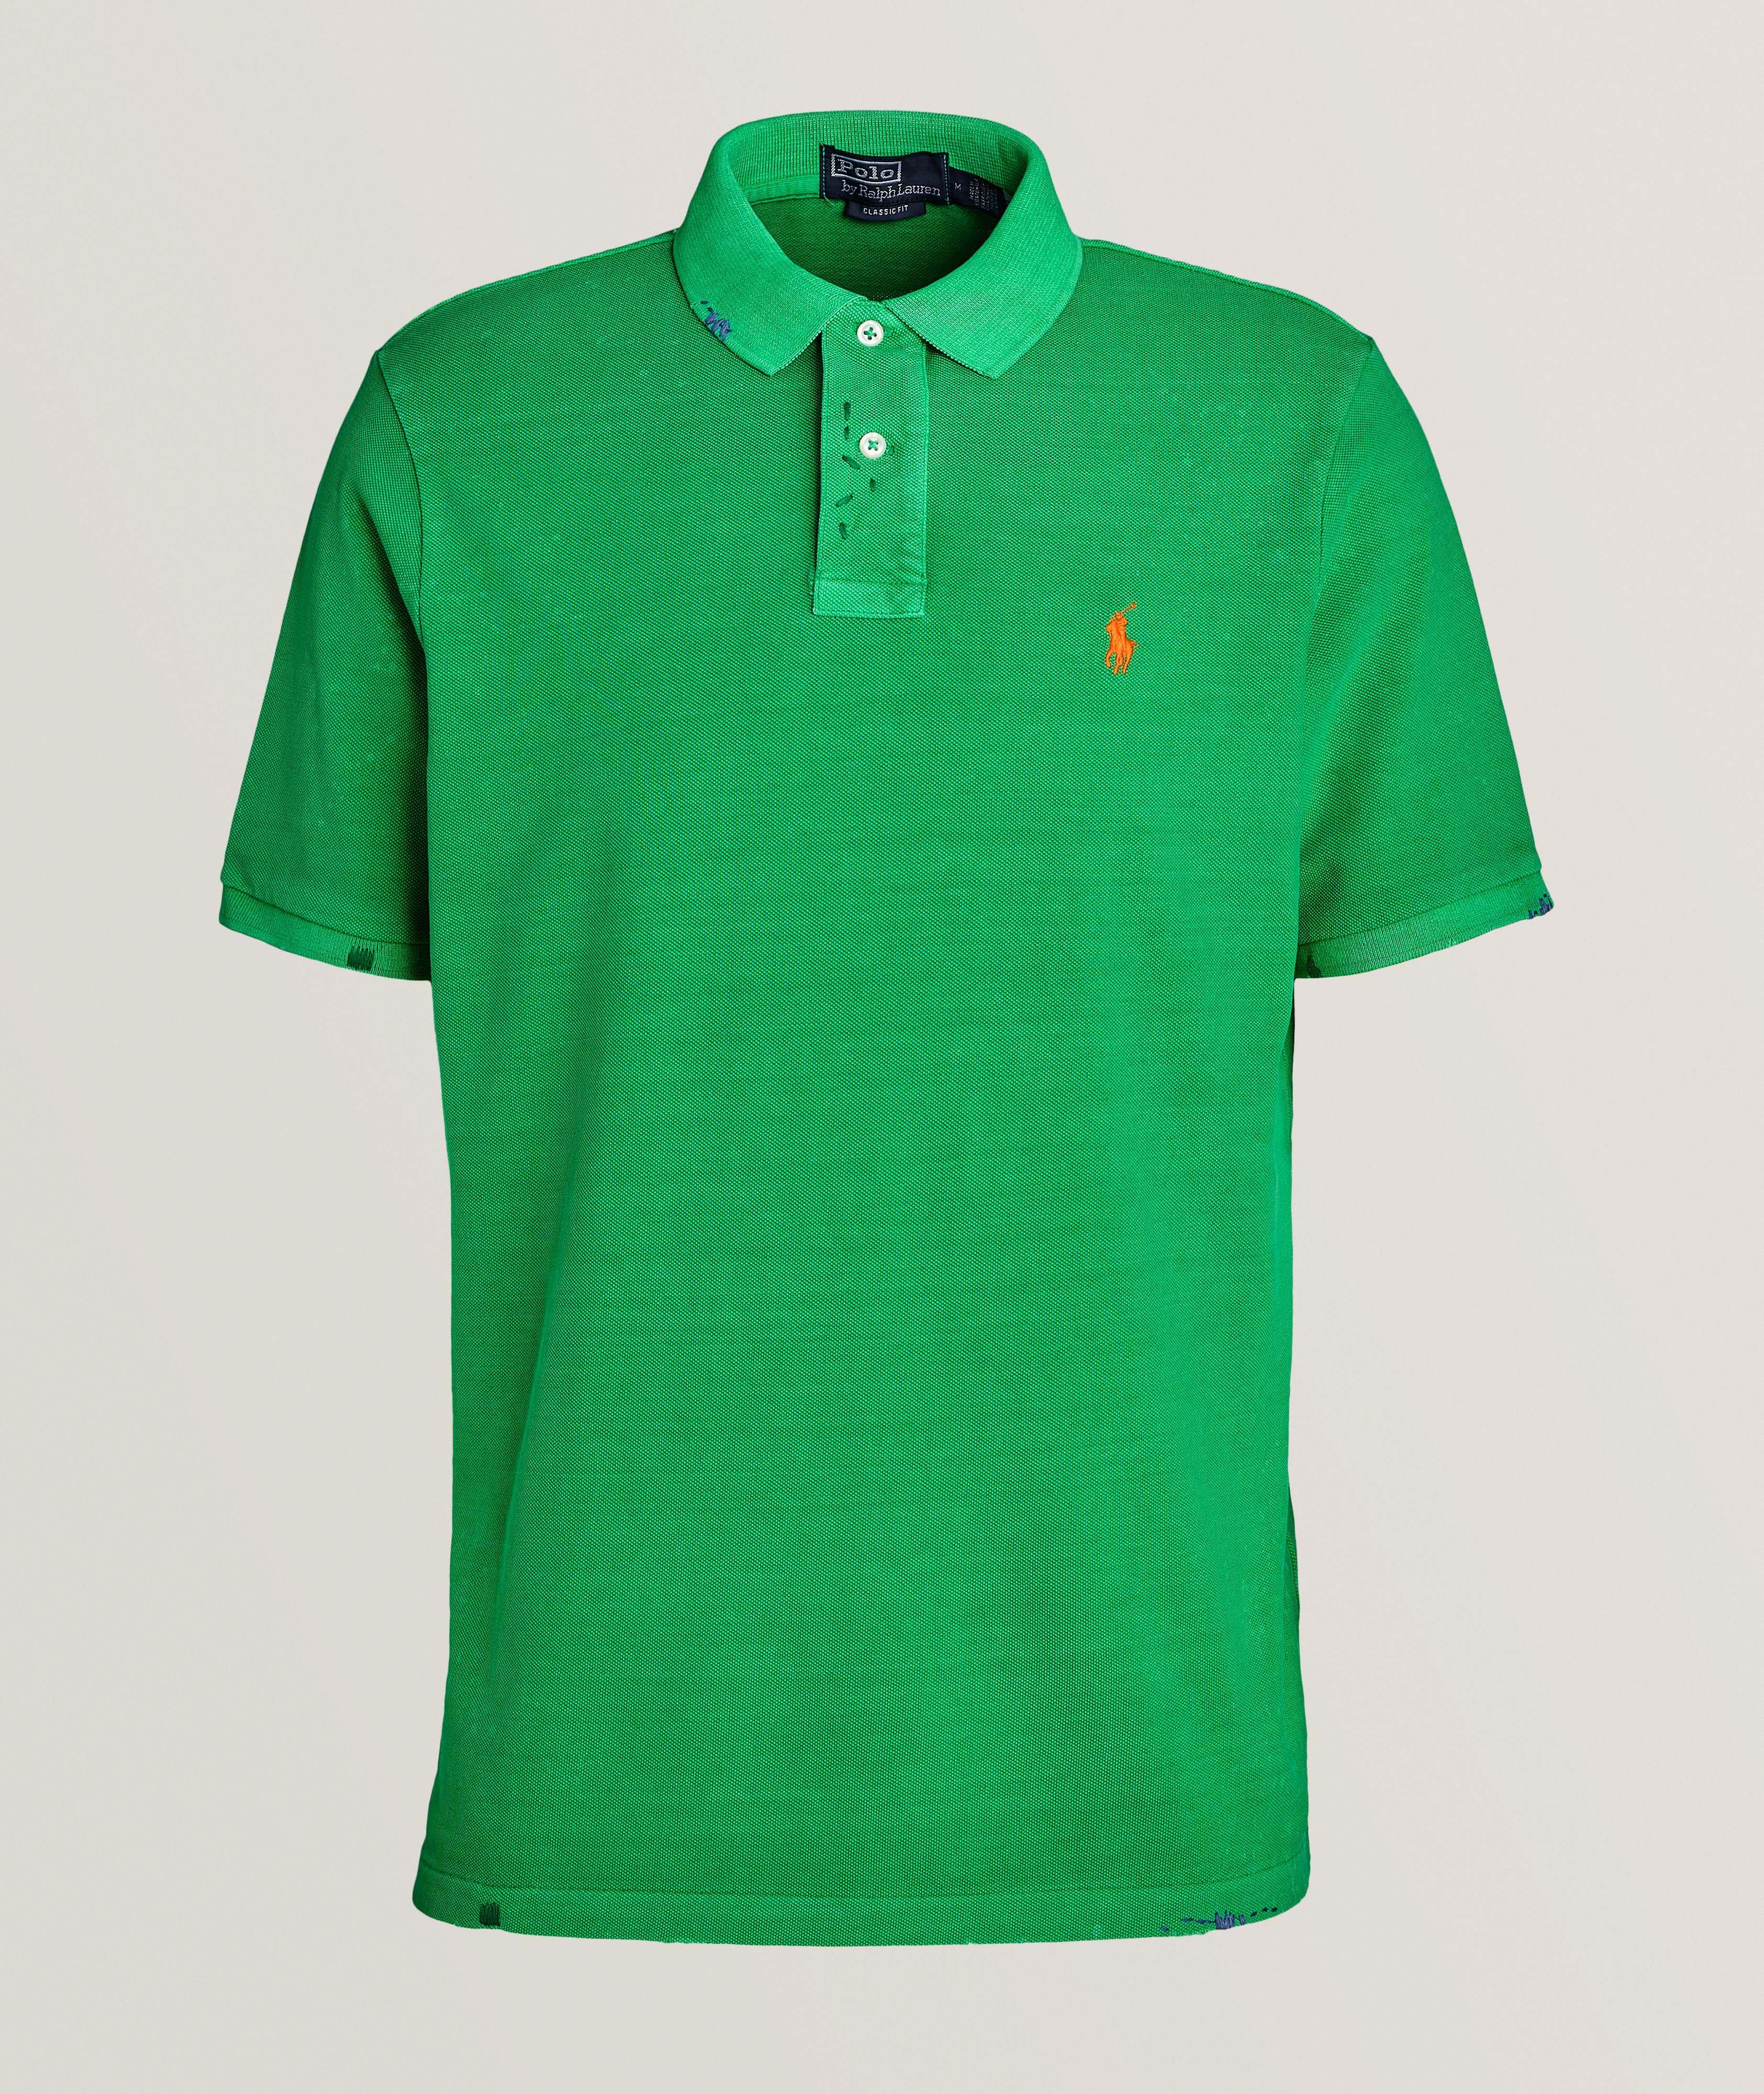 Distressed & Asymmetrically Stitched Cotton Polo  image 0